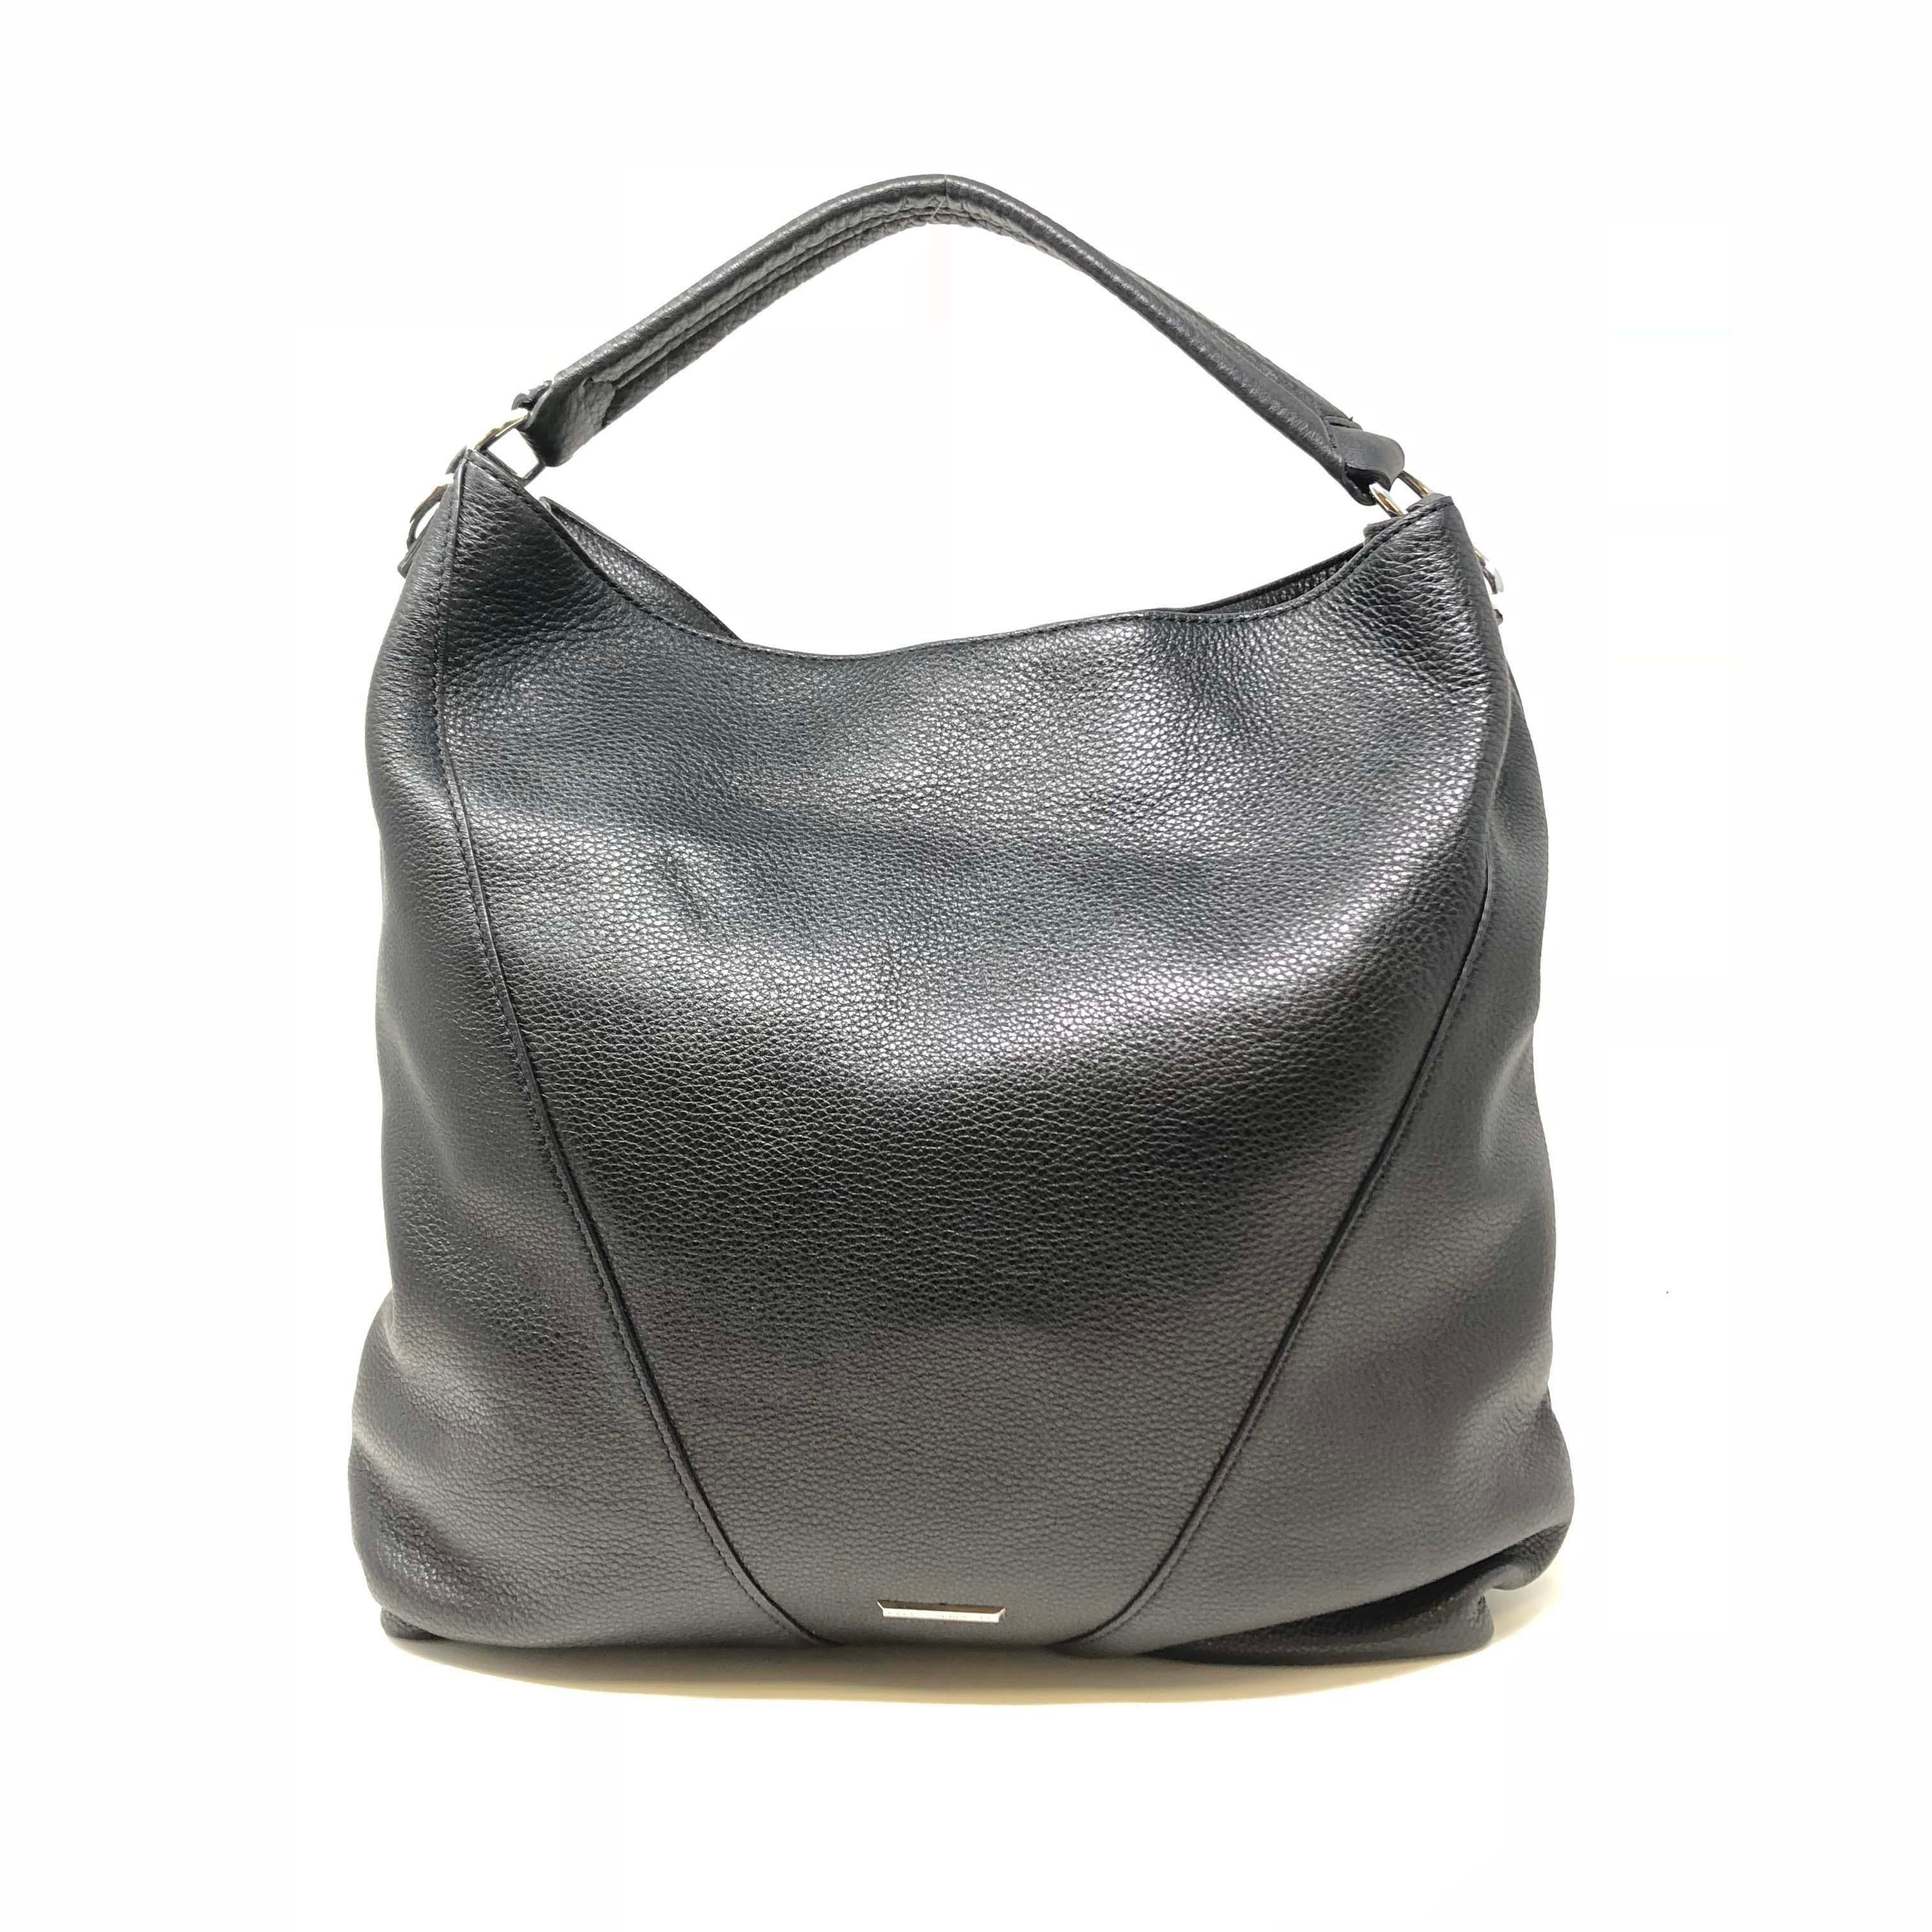 Slouchy and accented with leather tassels, this hobo bag is both super chic and versatile. It's roomy enough for all your work and gym essentials, but won't look out of place at dinner.

Genuine leather
15.5